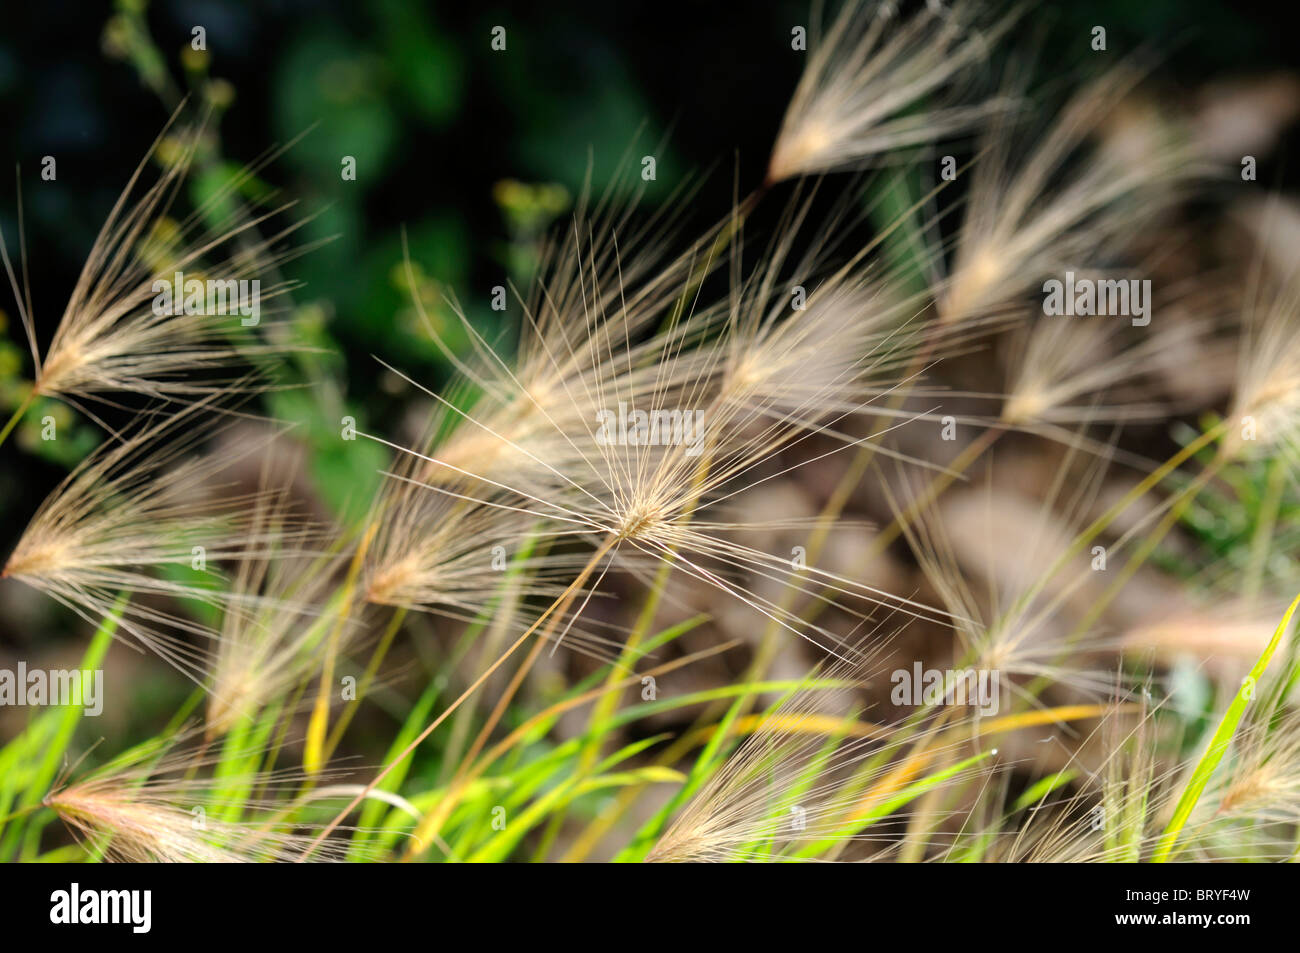 Hordeum jubatum Foxtail barley Squirrel tail perennial grass seed heads panicle inflorescence awn ornamental plant Stock Photo